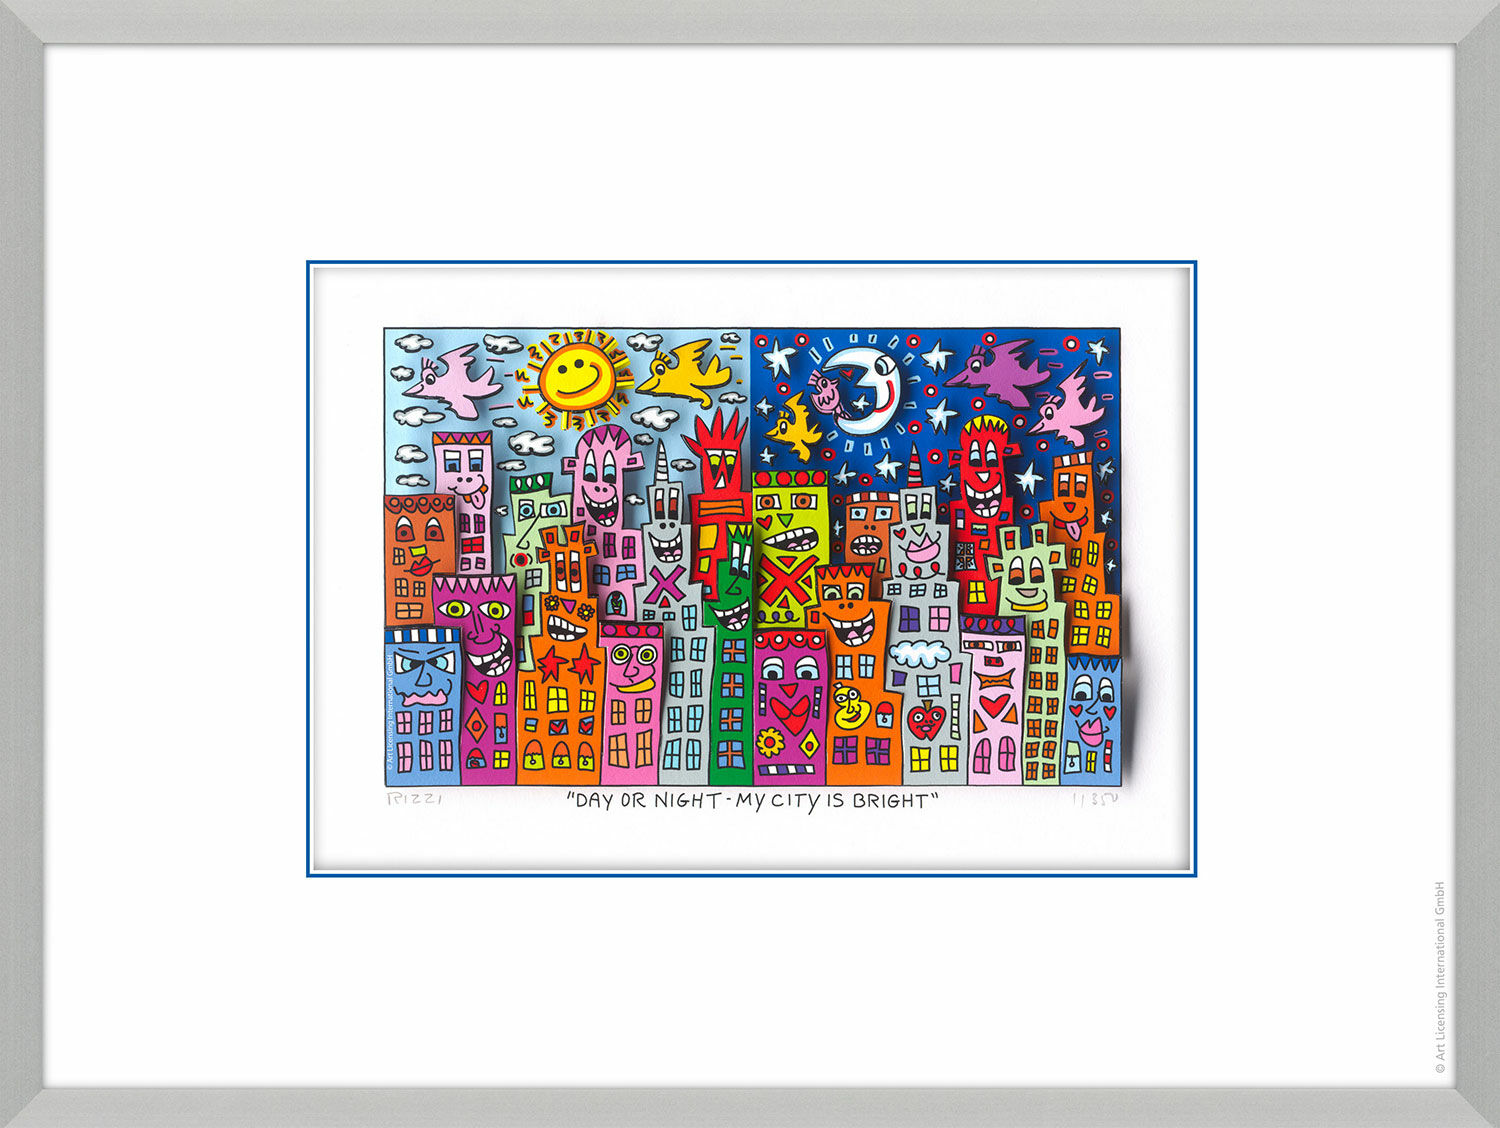 Tableau 3D "Day or Night - My City is Bright" (2019), encadrée von James Rizzi